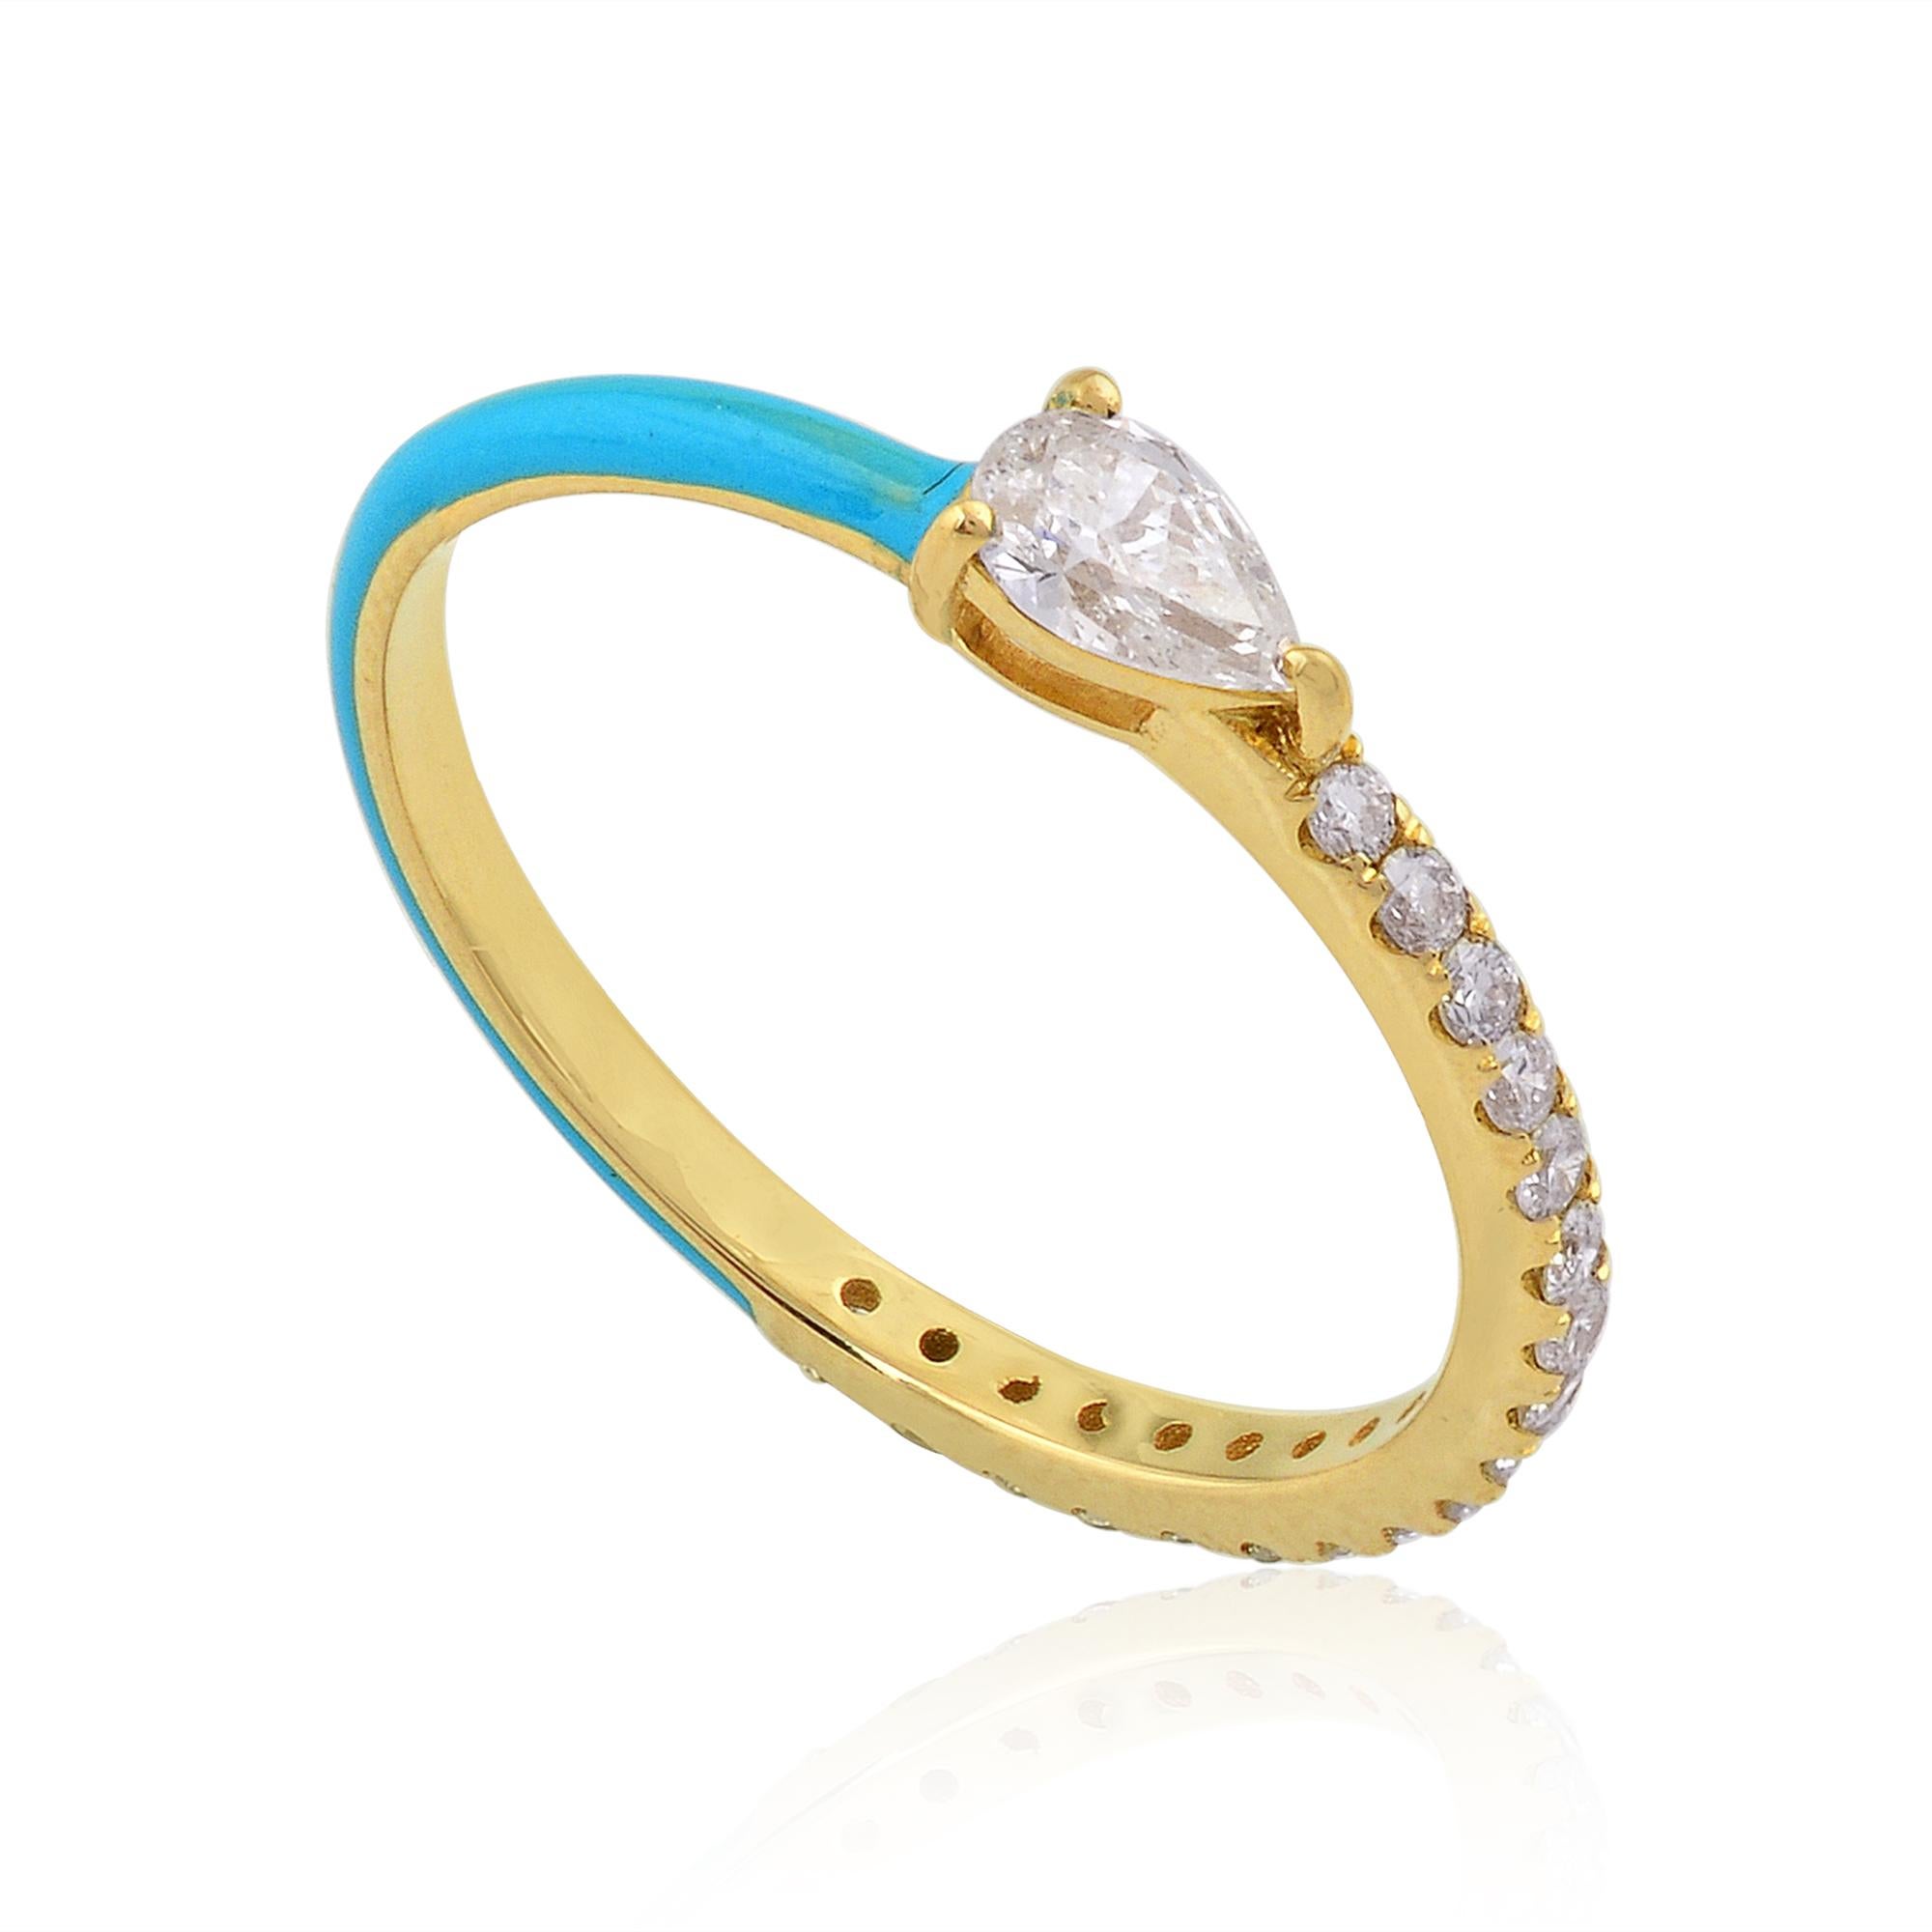 For Sale:  0.47 Carat Pear Diamond Turquoise Color Enamel Ring 14 Karat Yellow Gold Jewelry 2